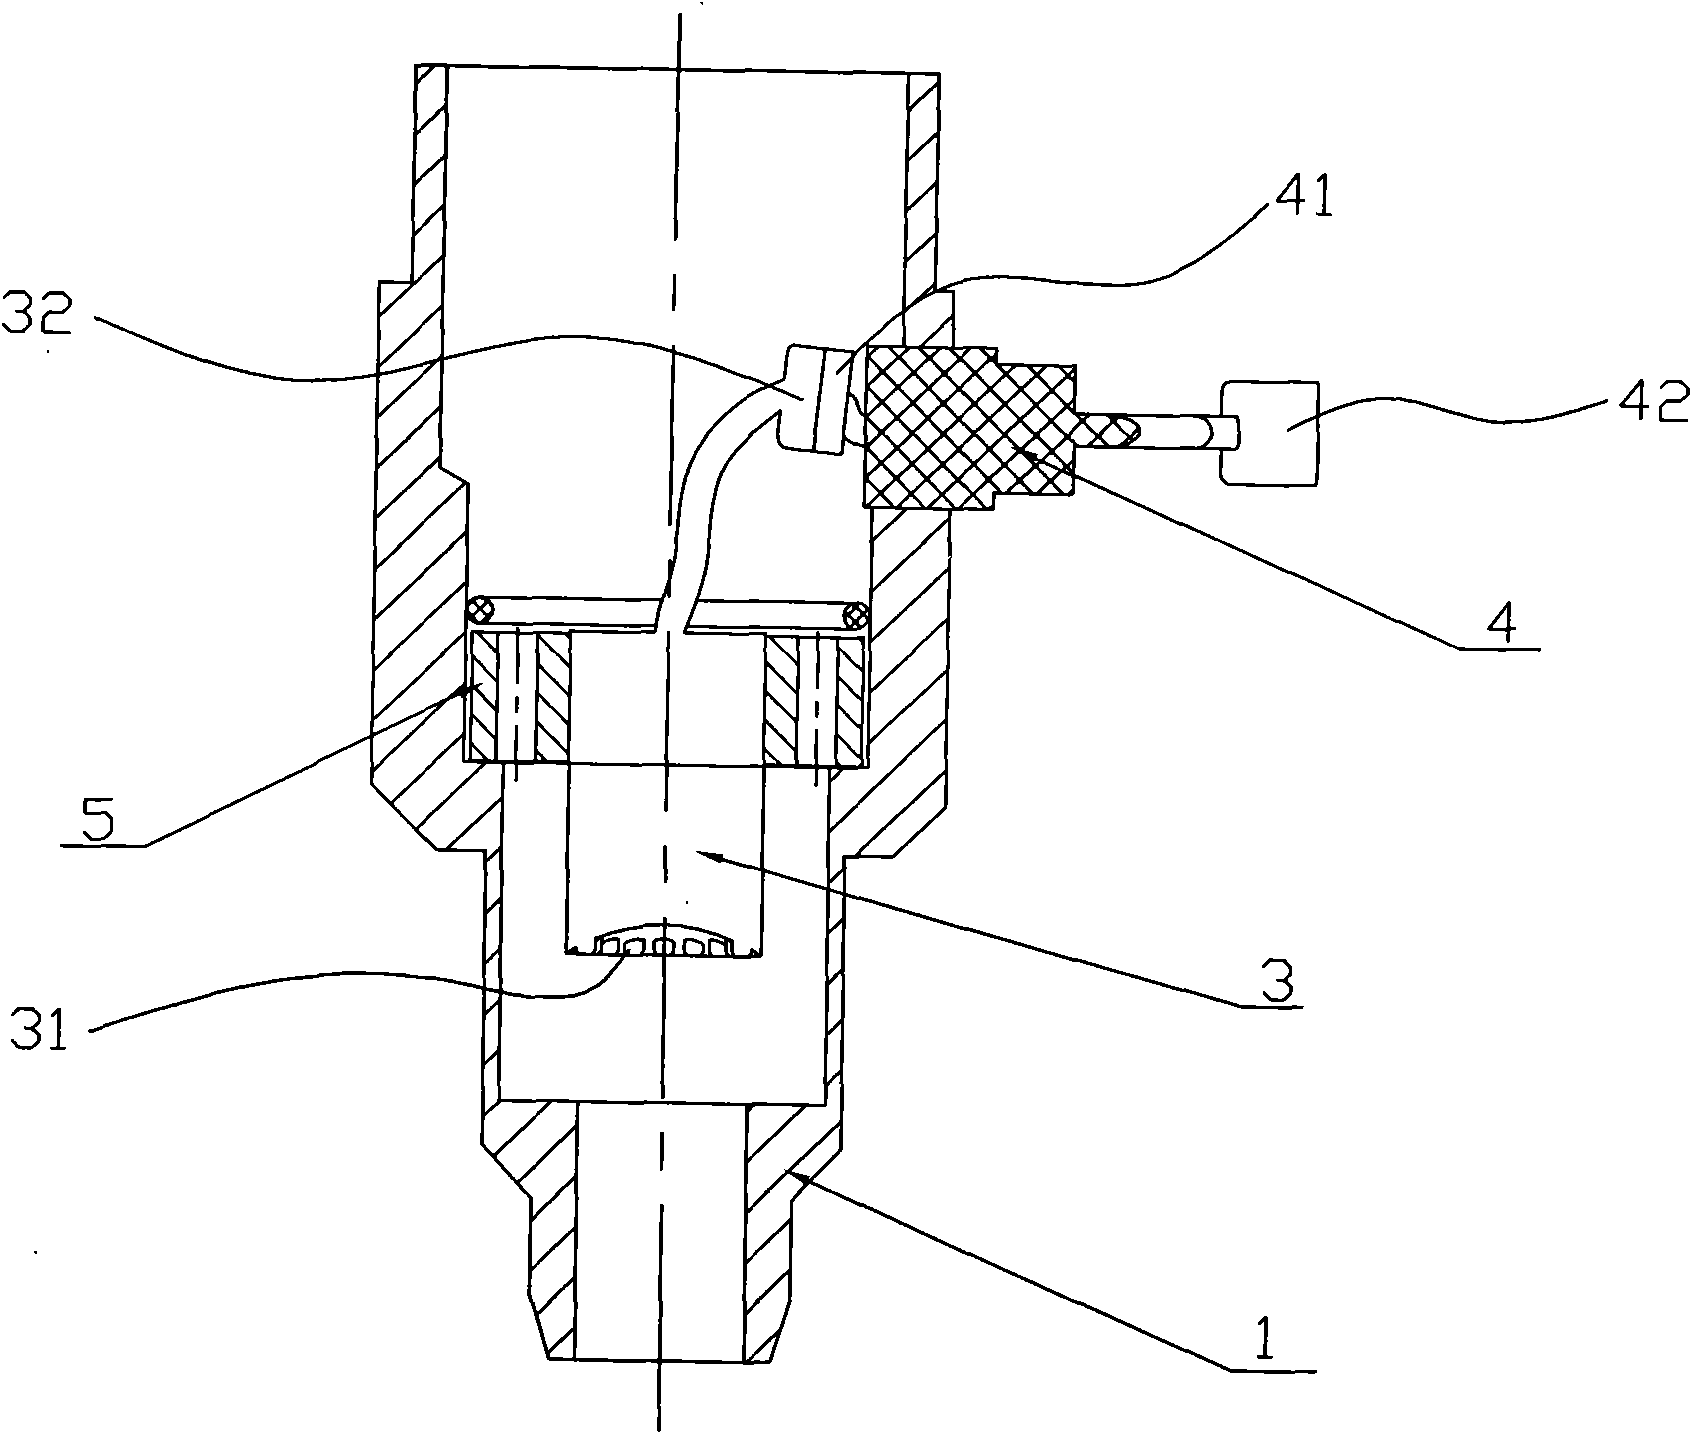 Suction nozzle structure with light source